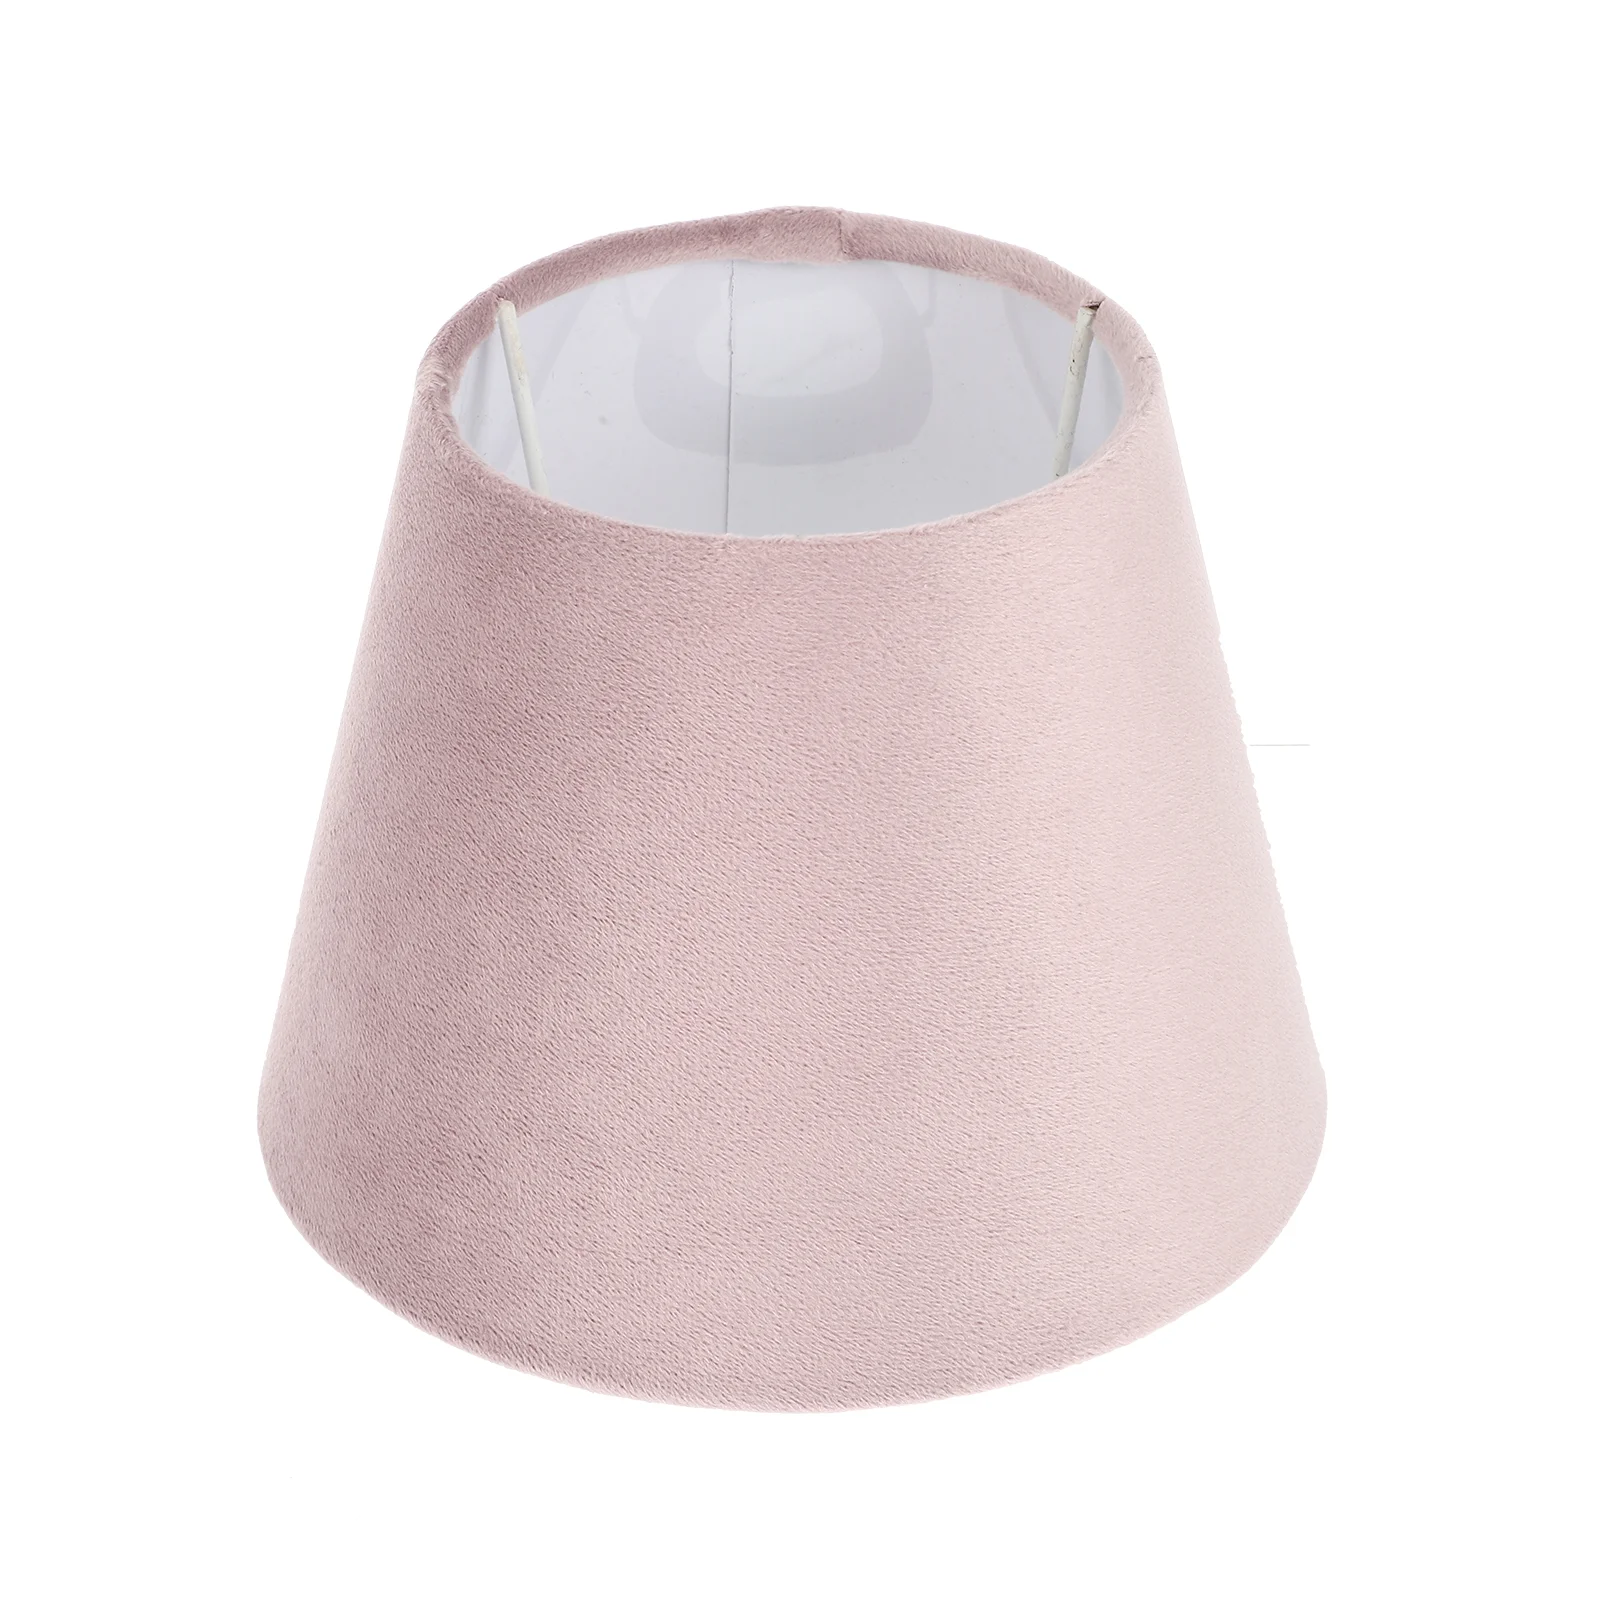 

Velvet Lampshade Household Drum Shades Lampshades for Table Barrel Cloth Tabletop Light Small Desk Vintage Retro Decor